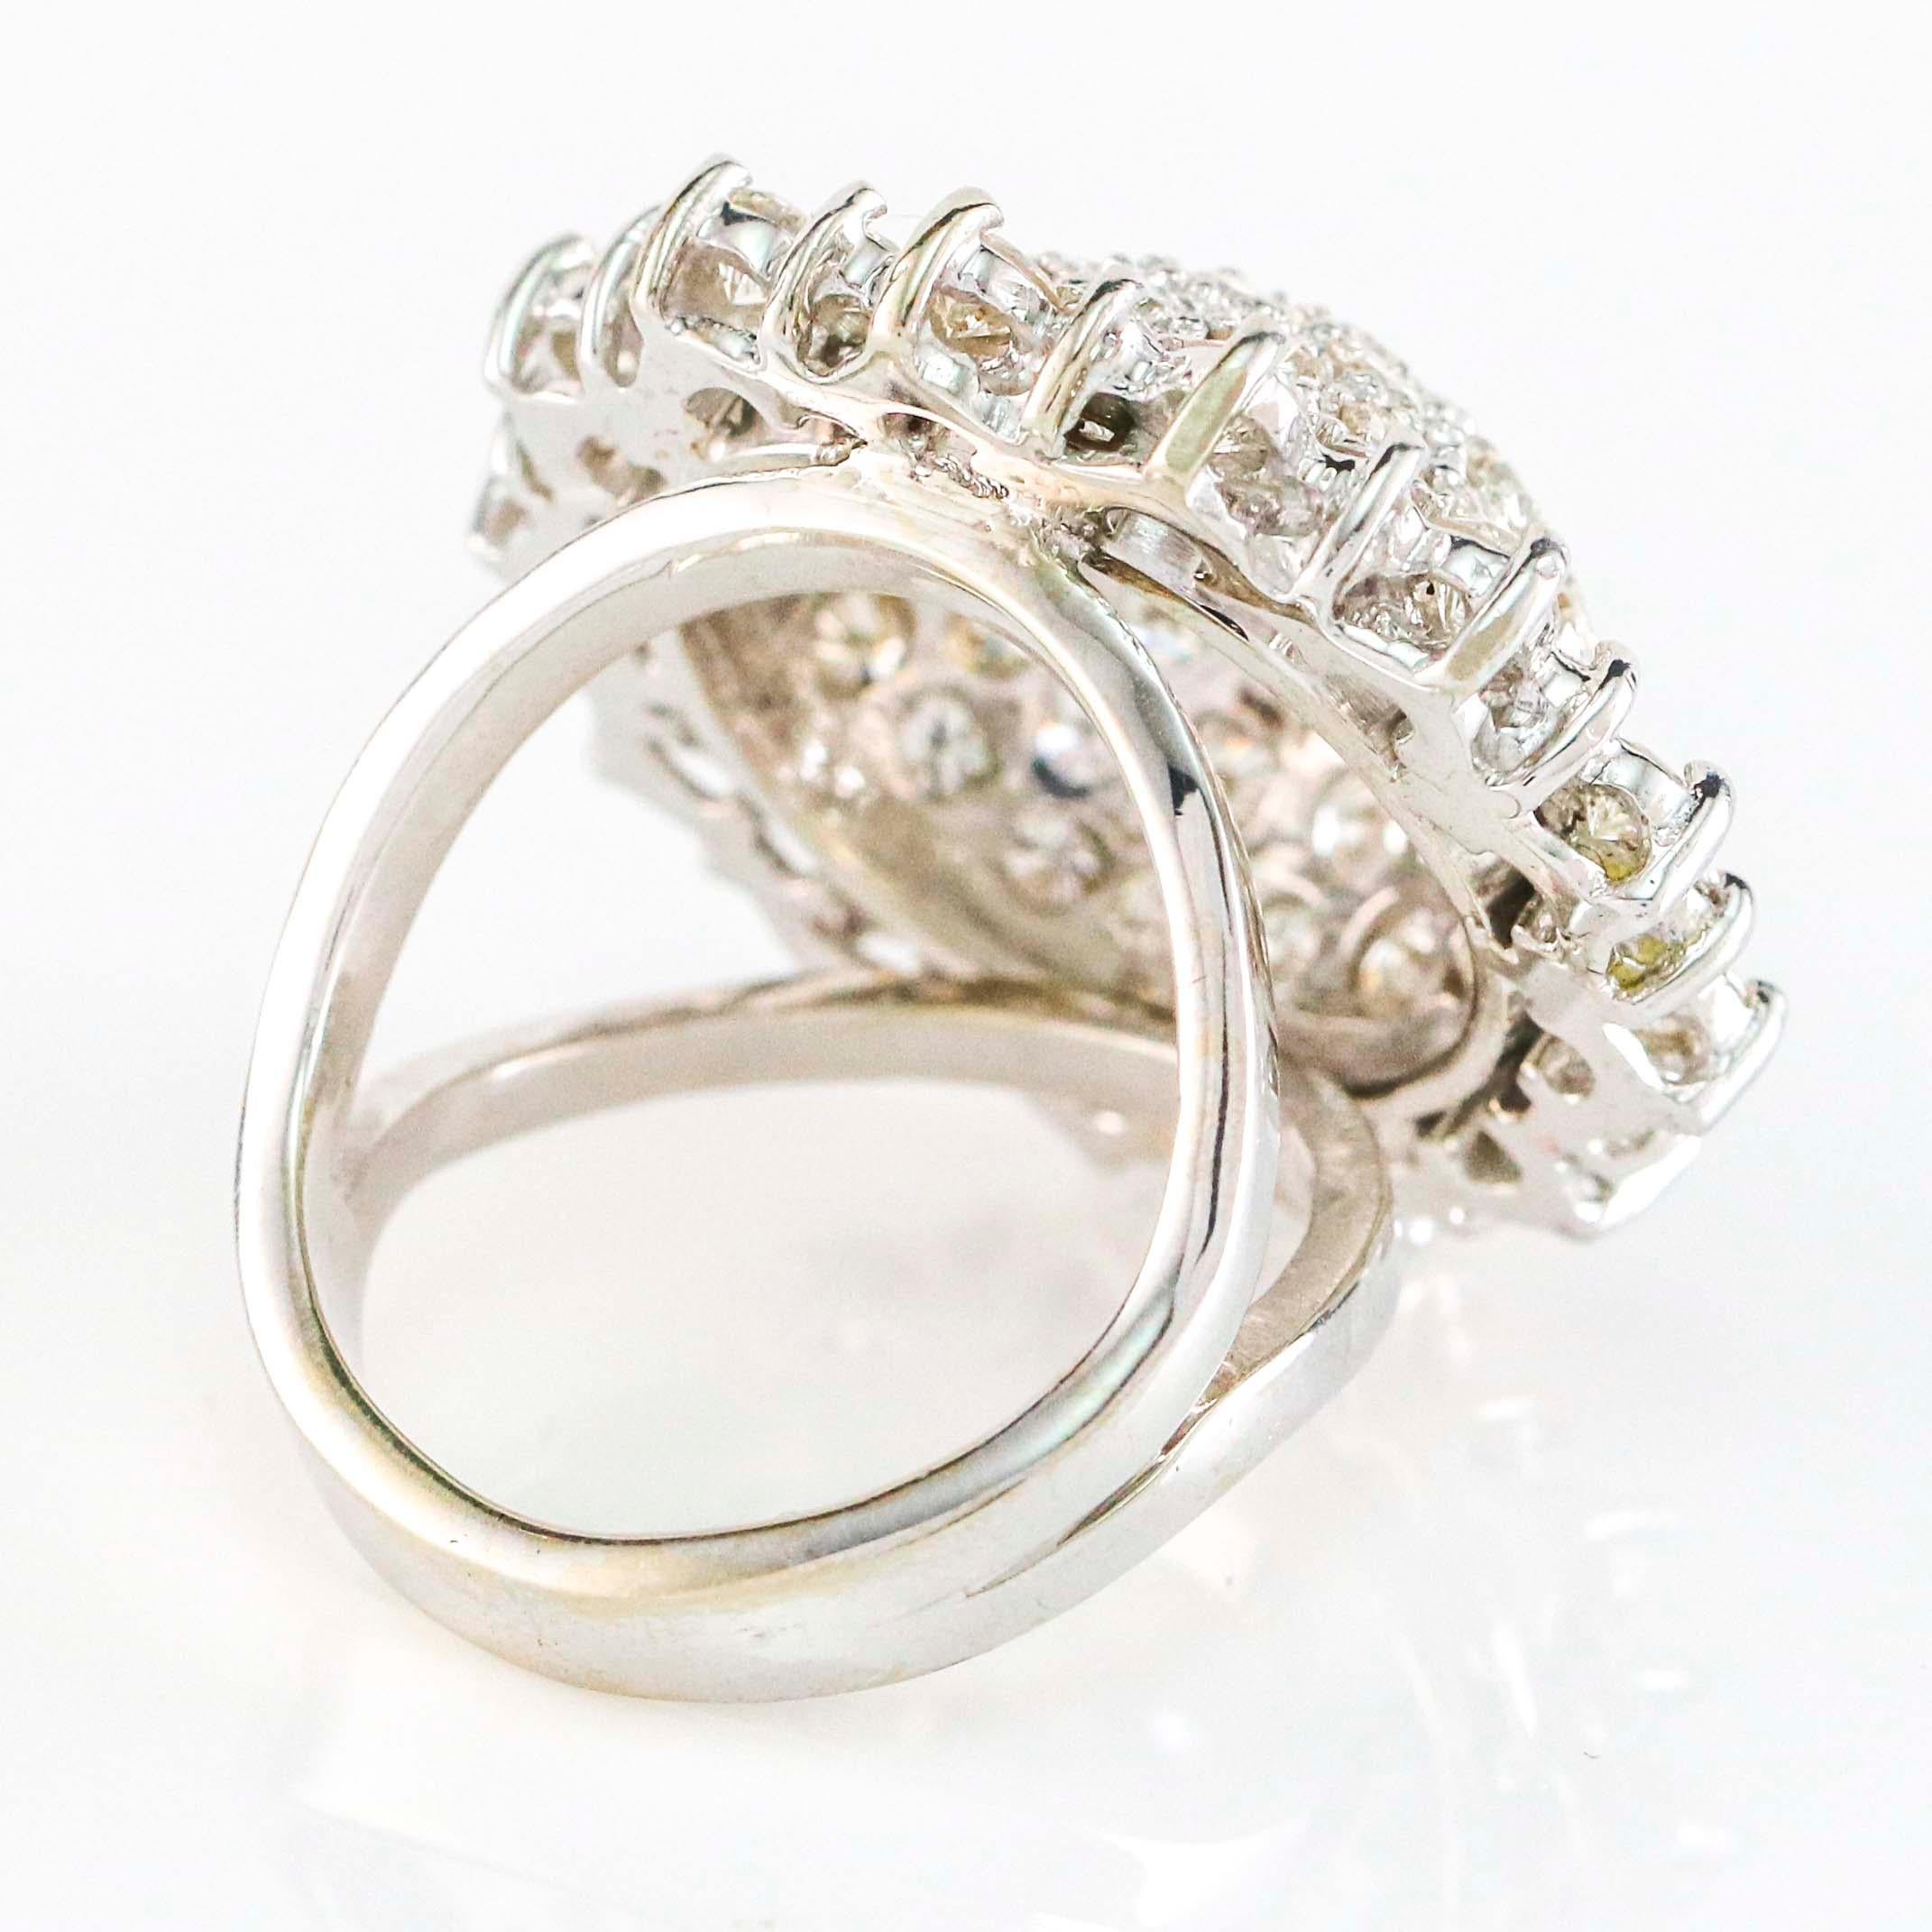 3.75 Carat Diamond Cocktail Ring 14 Karat White Gold In Excellent Condition For Sale In Fort Lauderdale, FL